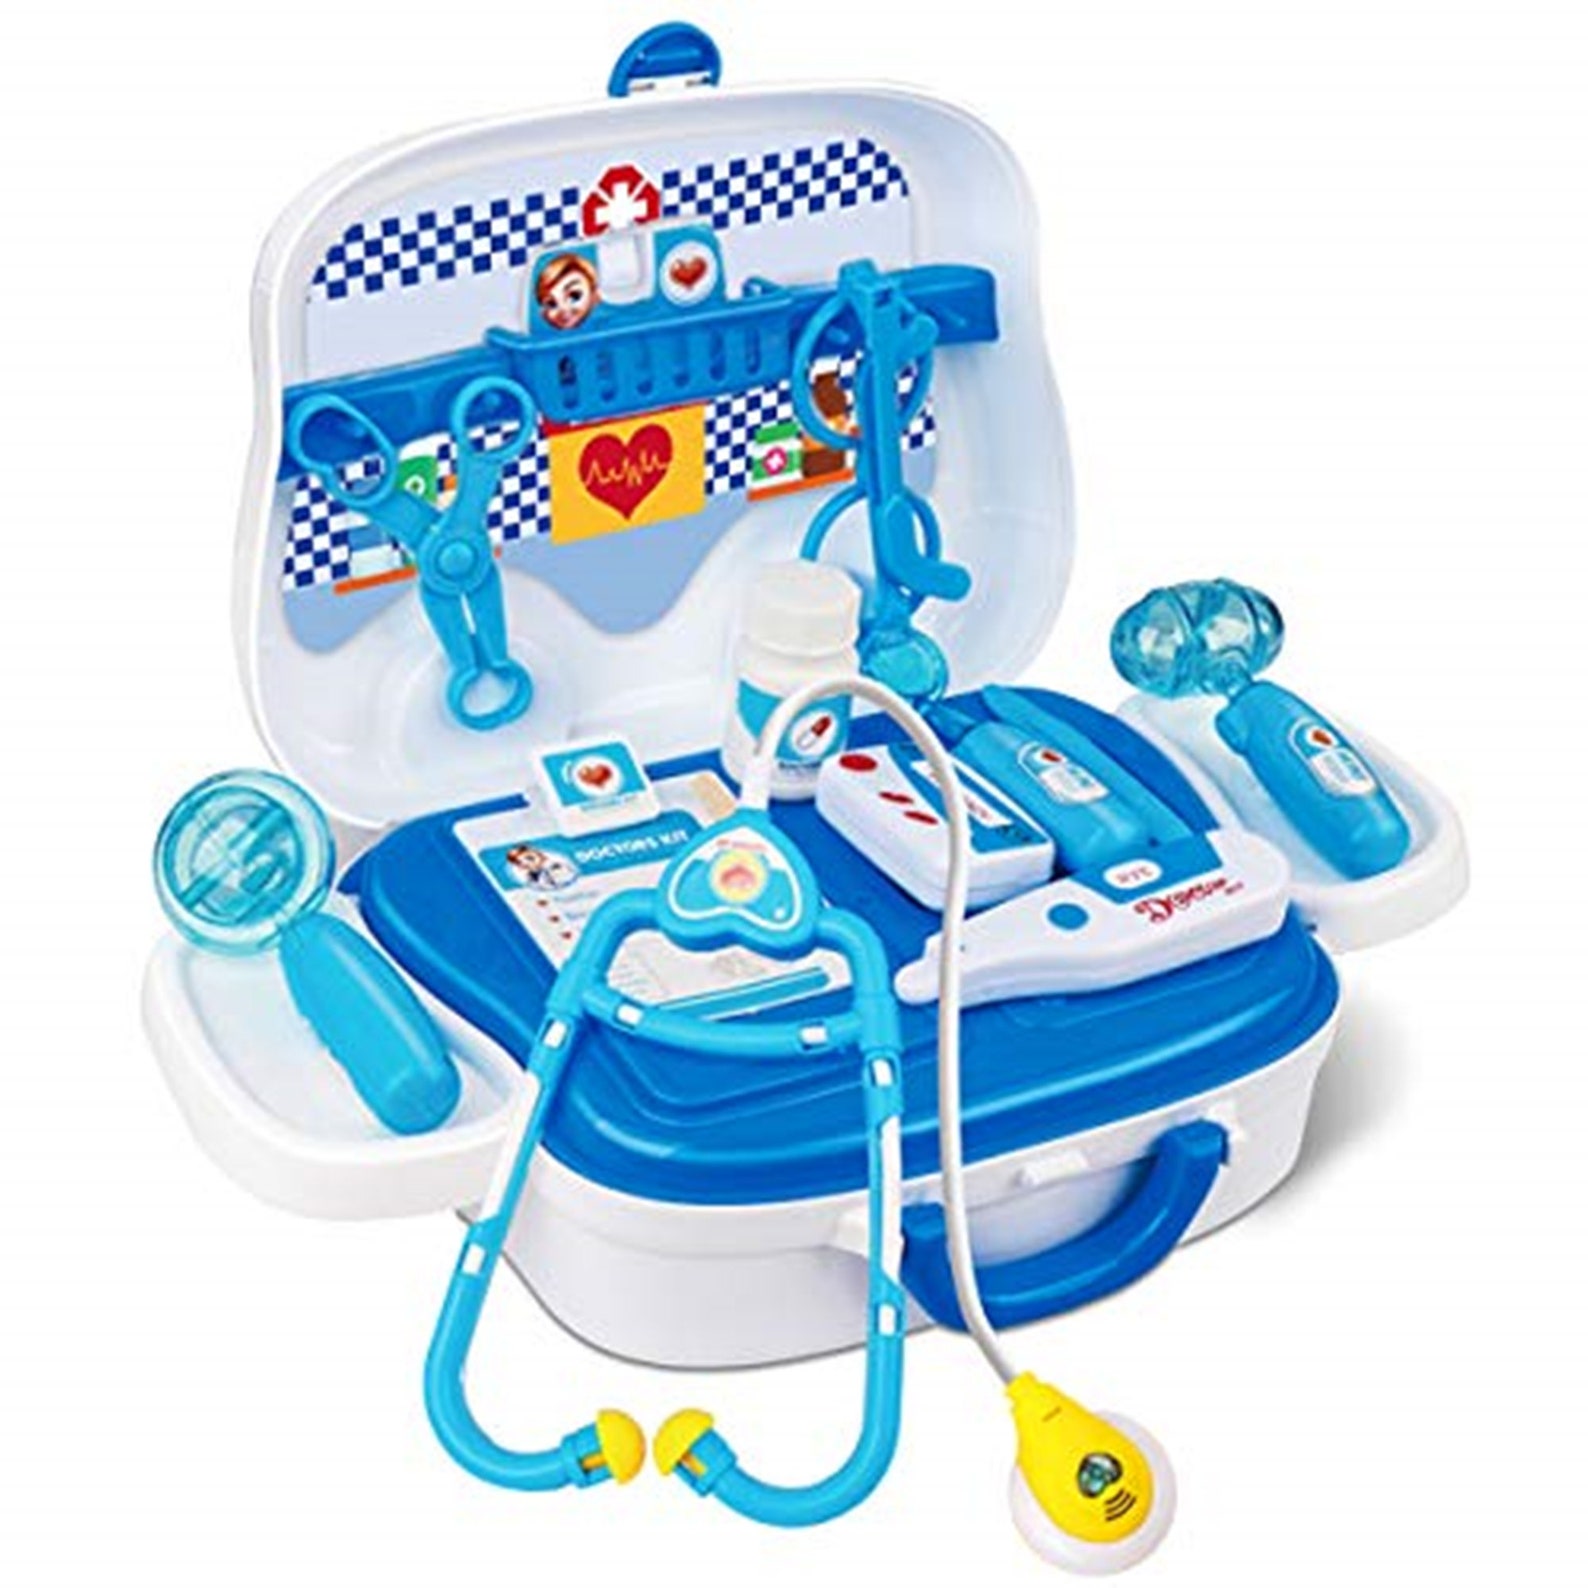 Best Price Toy Doctor Kit For Kids Pretend Play Doctor Set Etsy